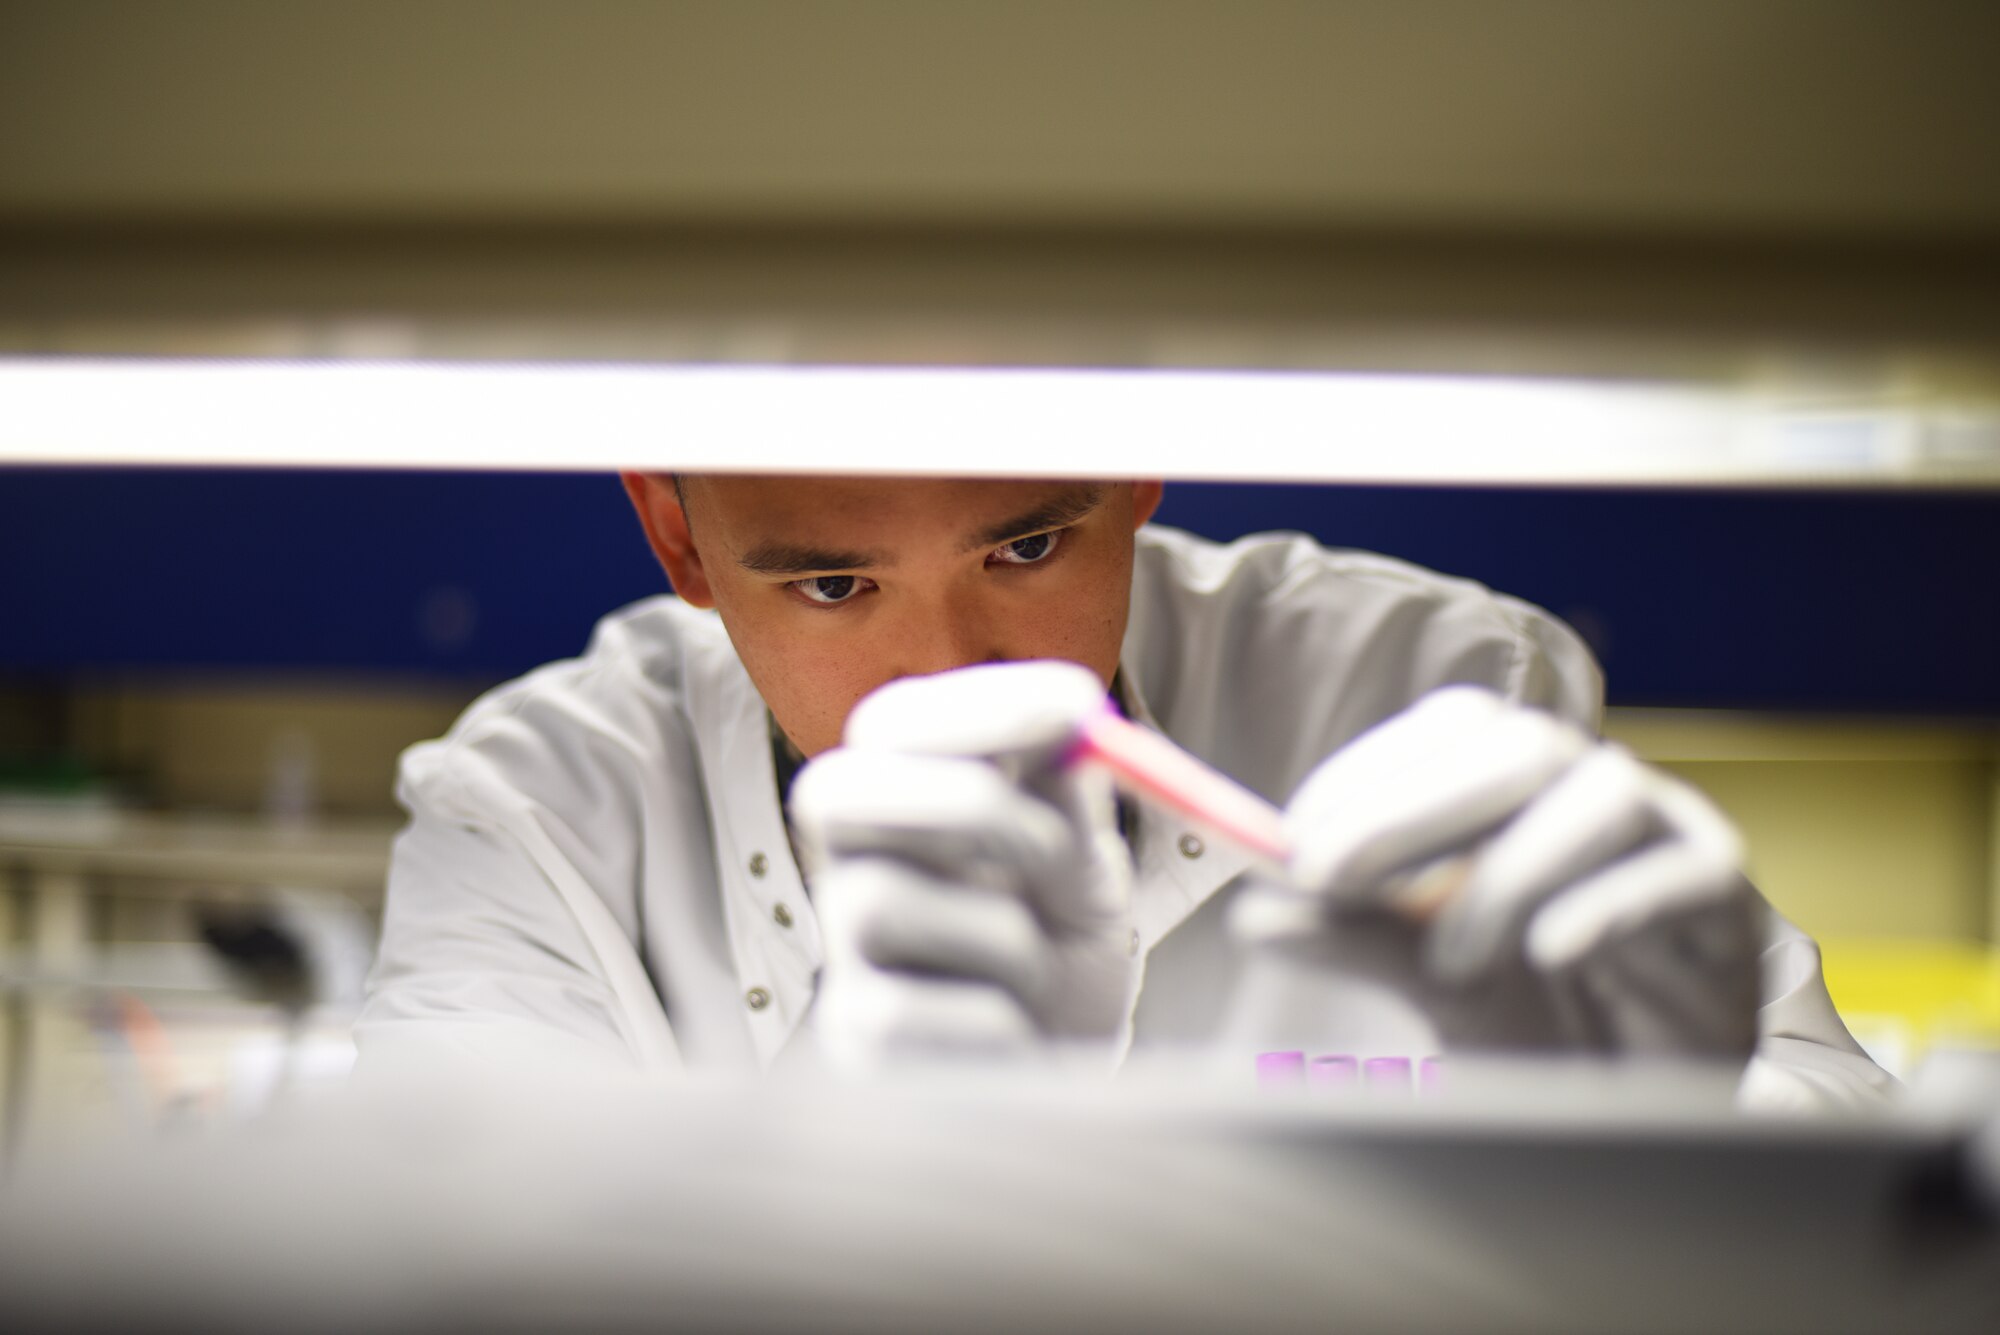 U.S. Air Force Senior Airman Philip Fisketjon, 341st Medical Group medical laboratory technician, examines a complete blood count at the laboratory on Malmstrom Air Force Base, Montana, Aug. 13, 2019. Medical laboratory technicians play an integral role in providing patients with a proper diagnosis and treatment by conducting essential tests on body substances. (U.S. Air Force photo by Airman 1st Class Jacob M. Thompson)